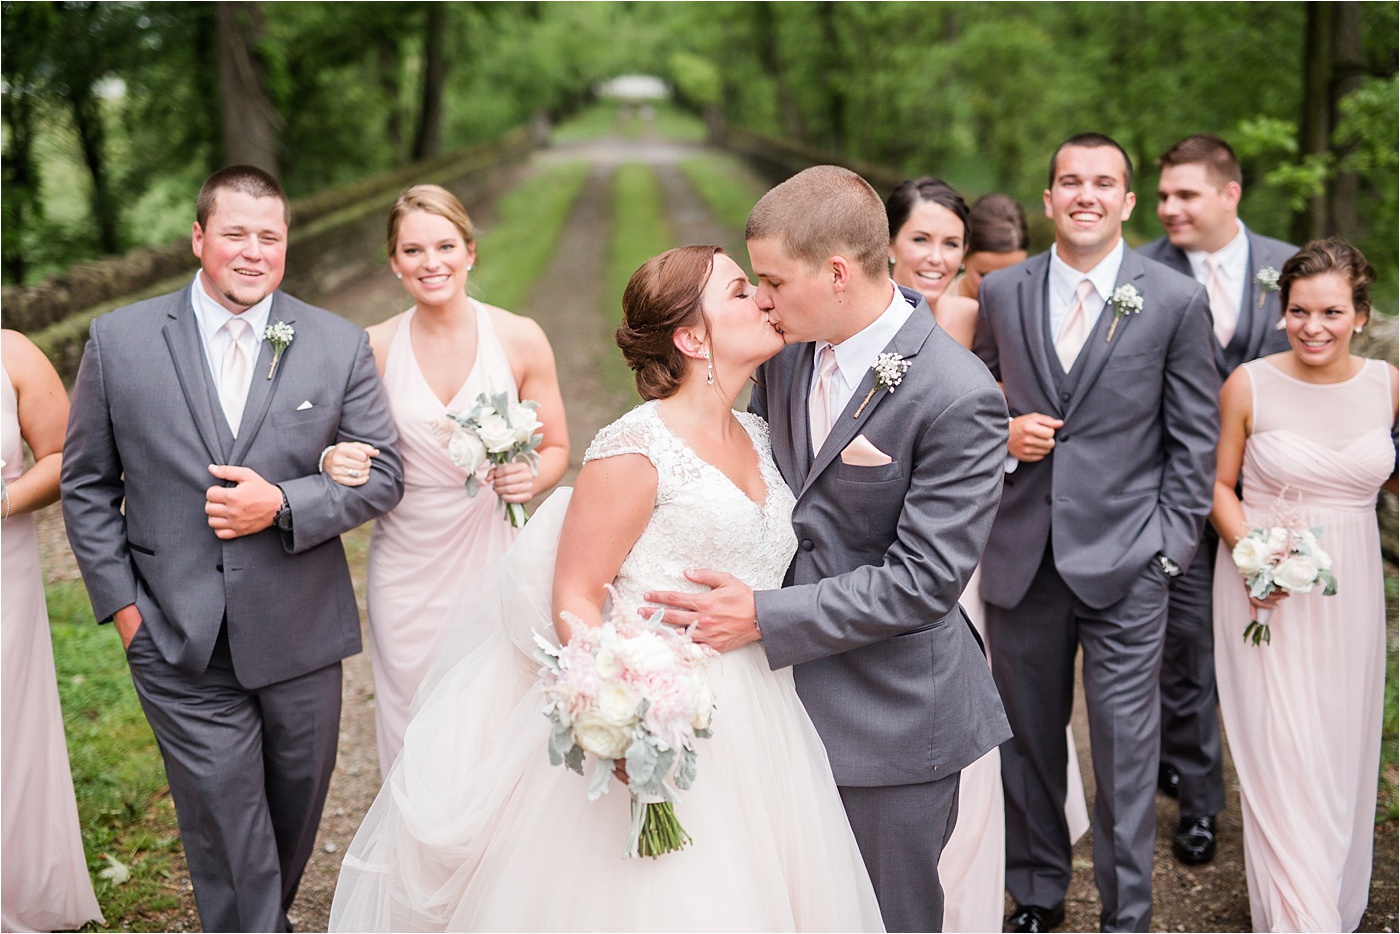 A Blush Outdoor wedding at Irongate Equestrian | KariMe Photography_0115